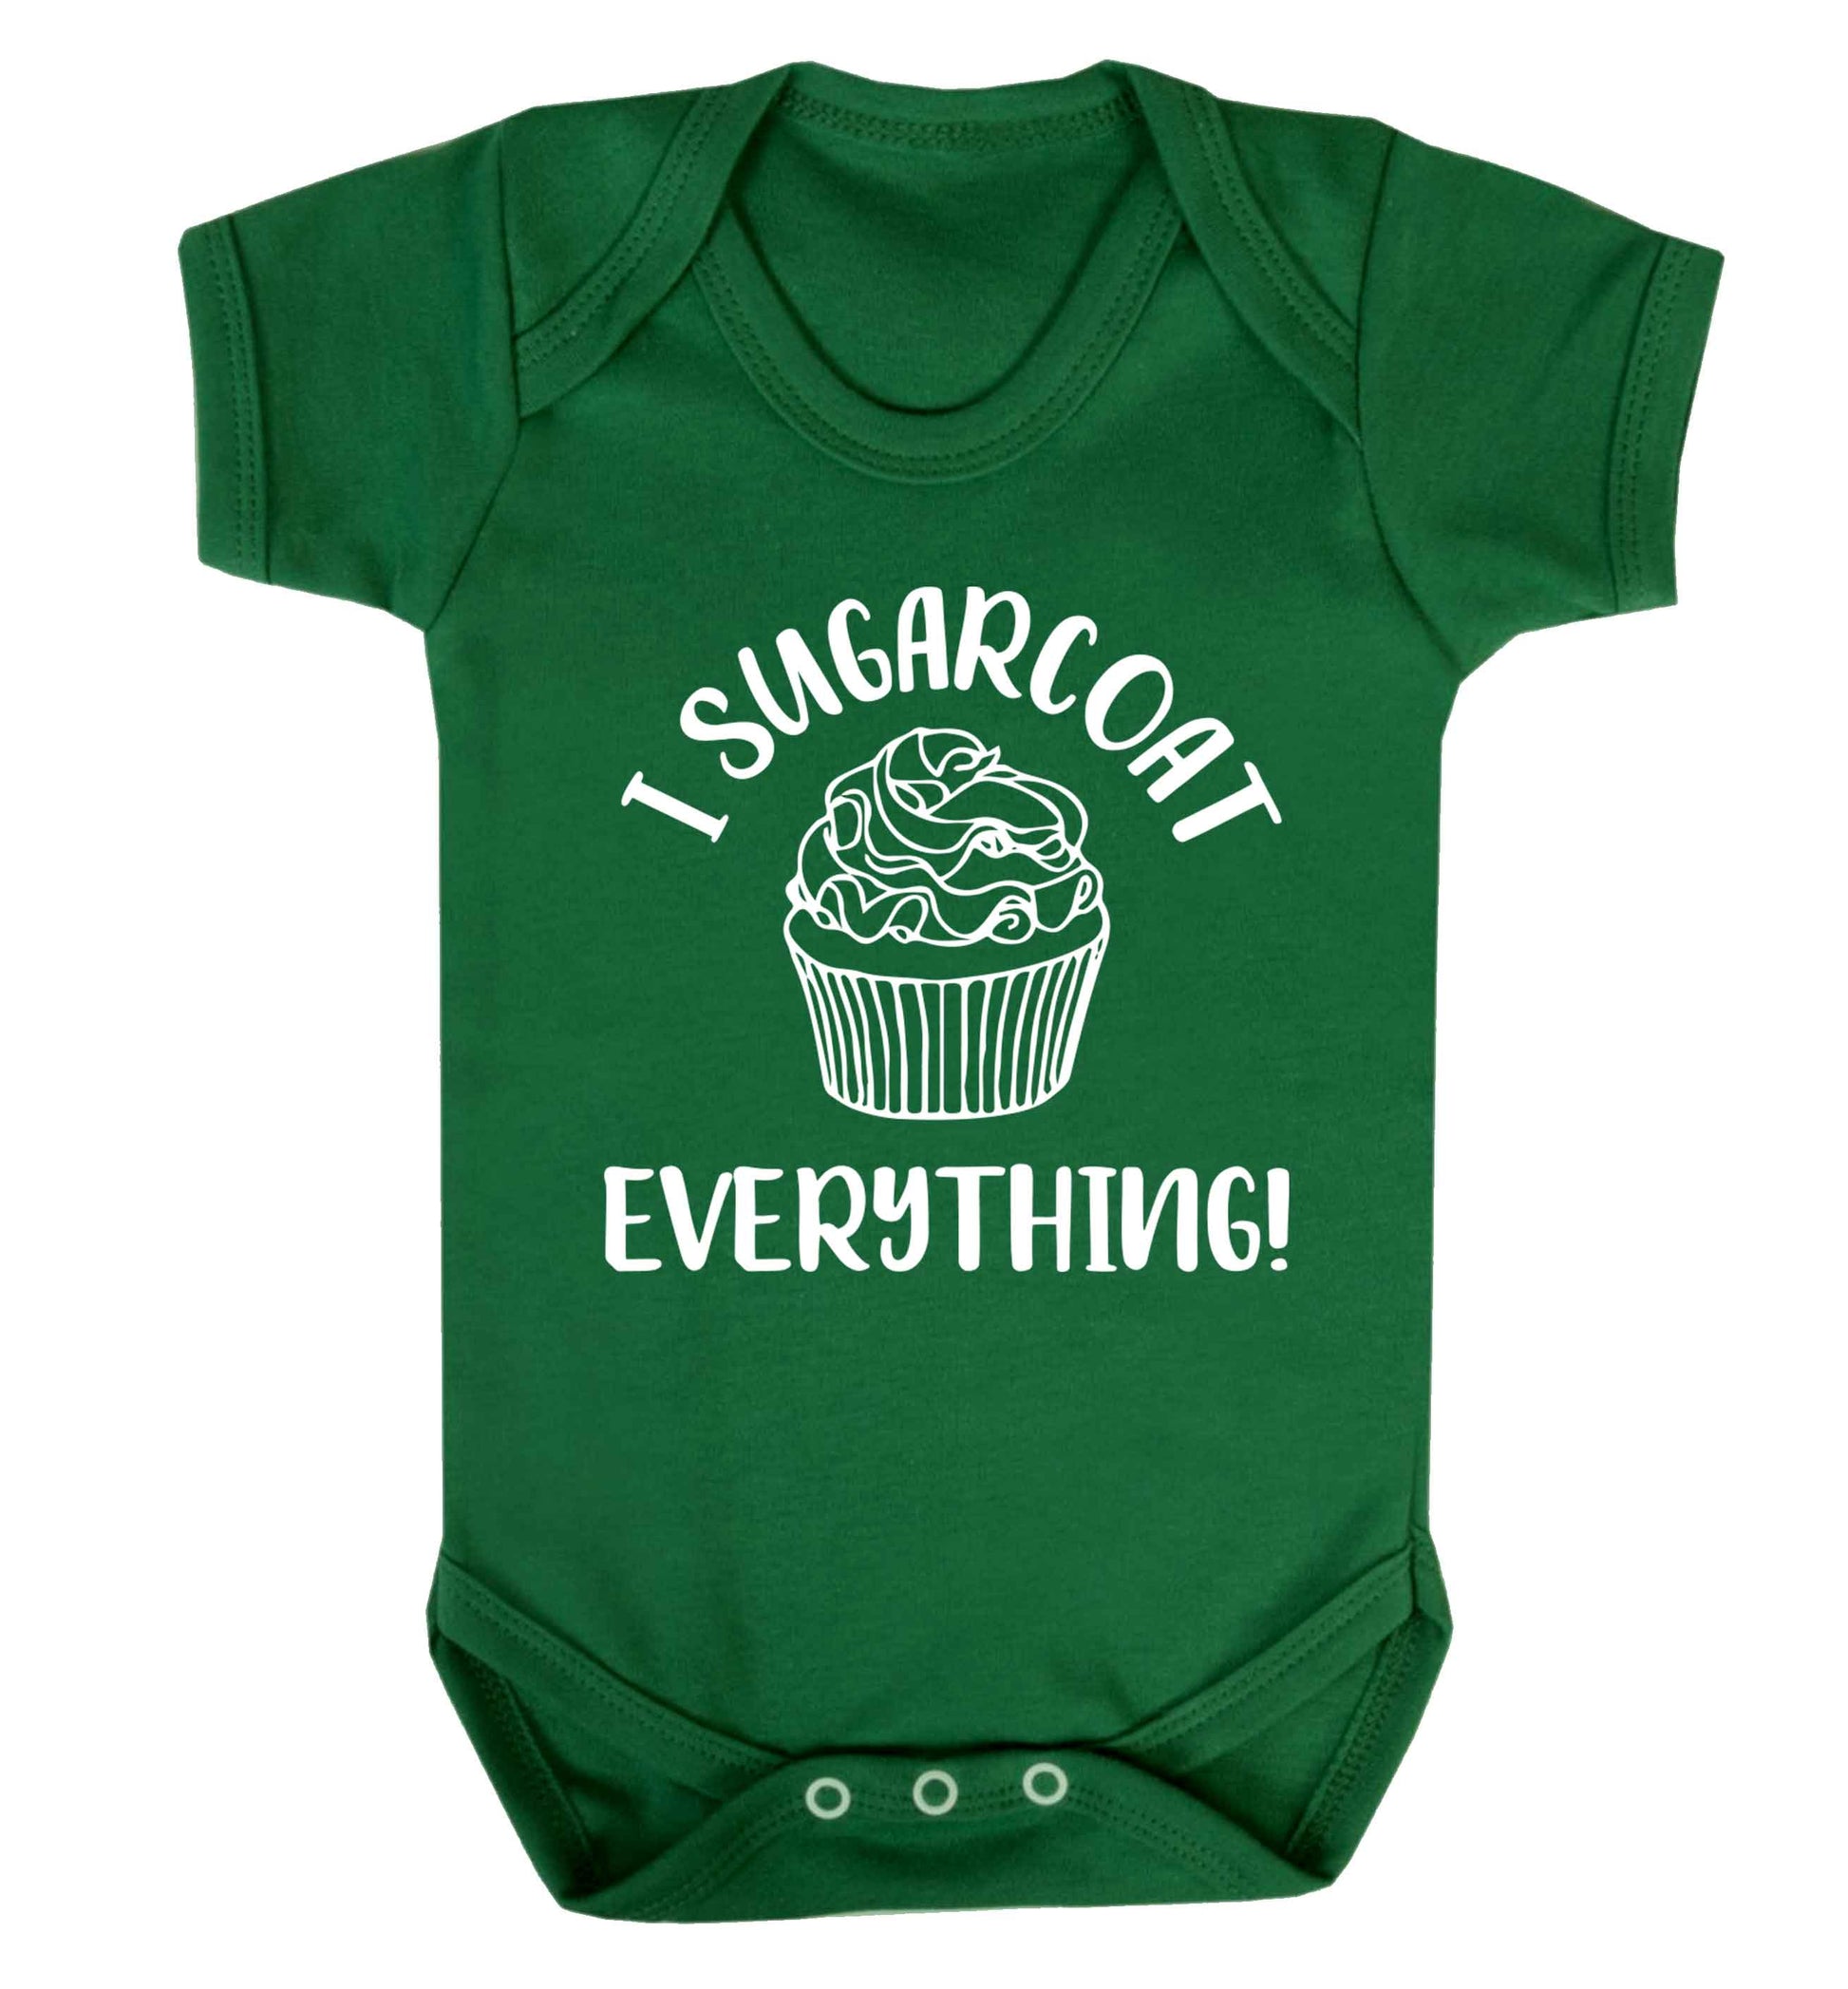 I sugarcoat everything Baby Vest green 18-24 months